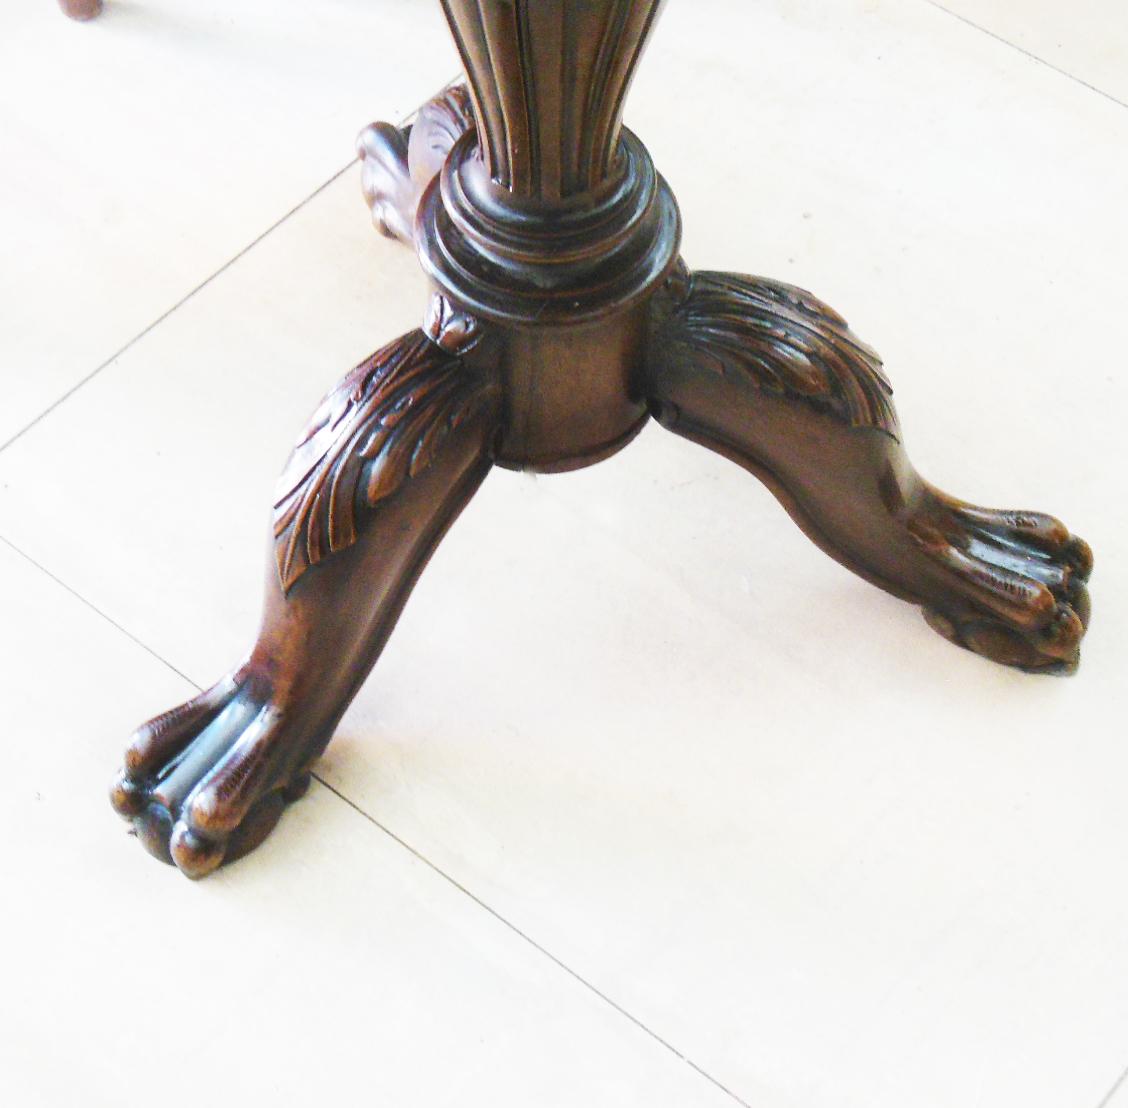 Round tripod-shaped side table with lion-shaped legs
  
It has a brown color with a nice vet on the leg, the lion's claw
  
It has a good size, ideal as a side table as it can serve as multiple functions in the living room or even in an entrance or